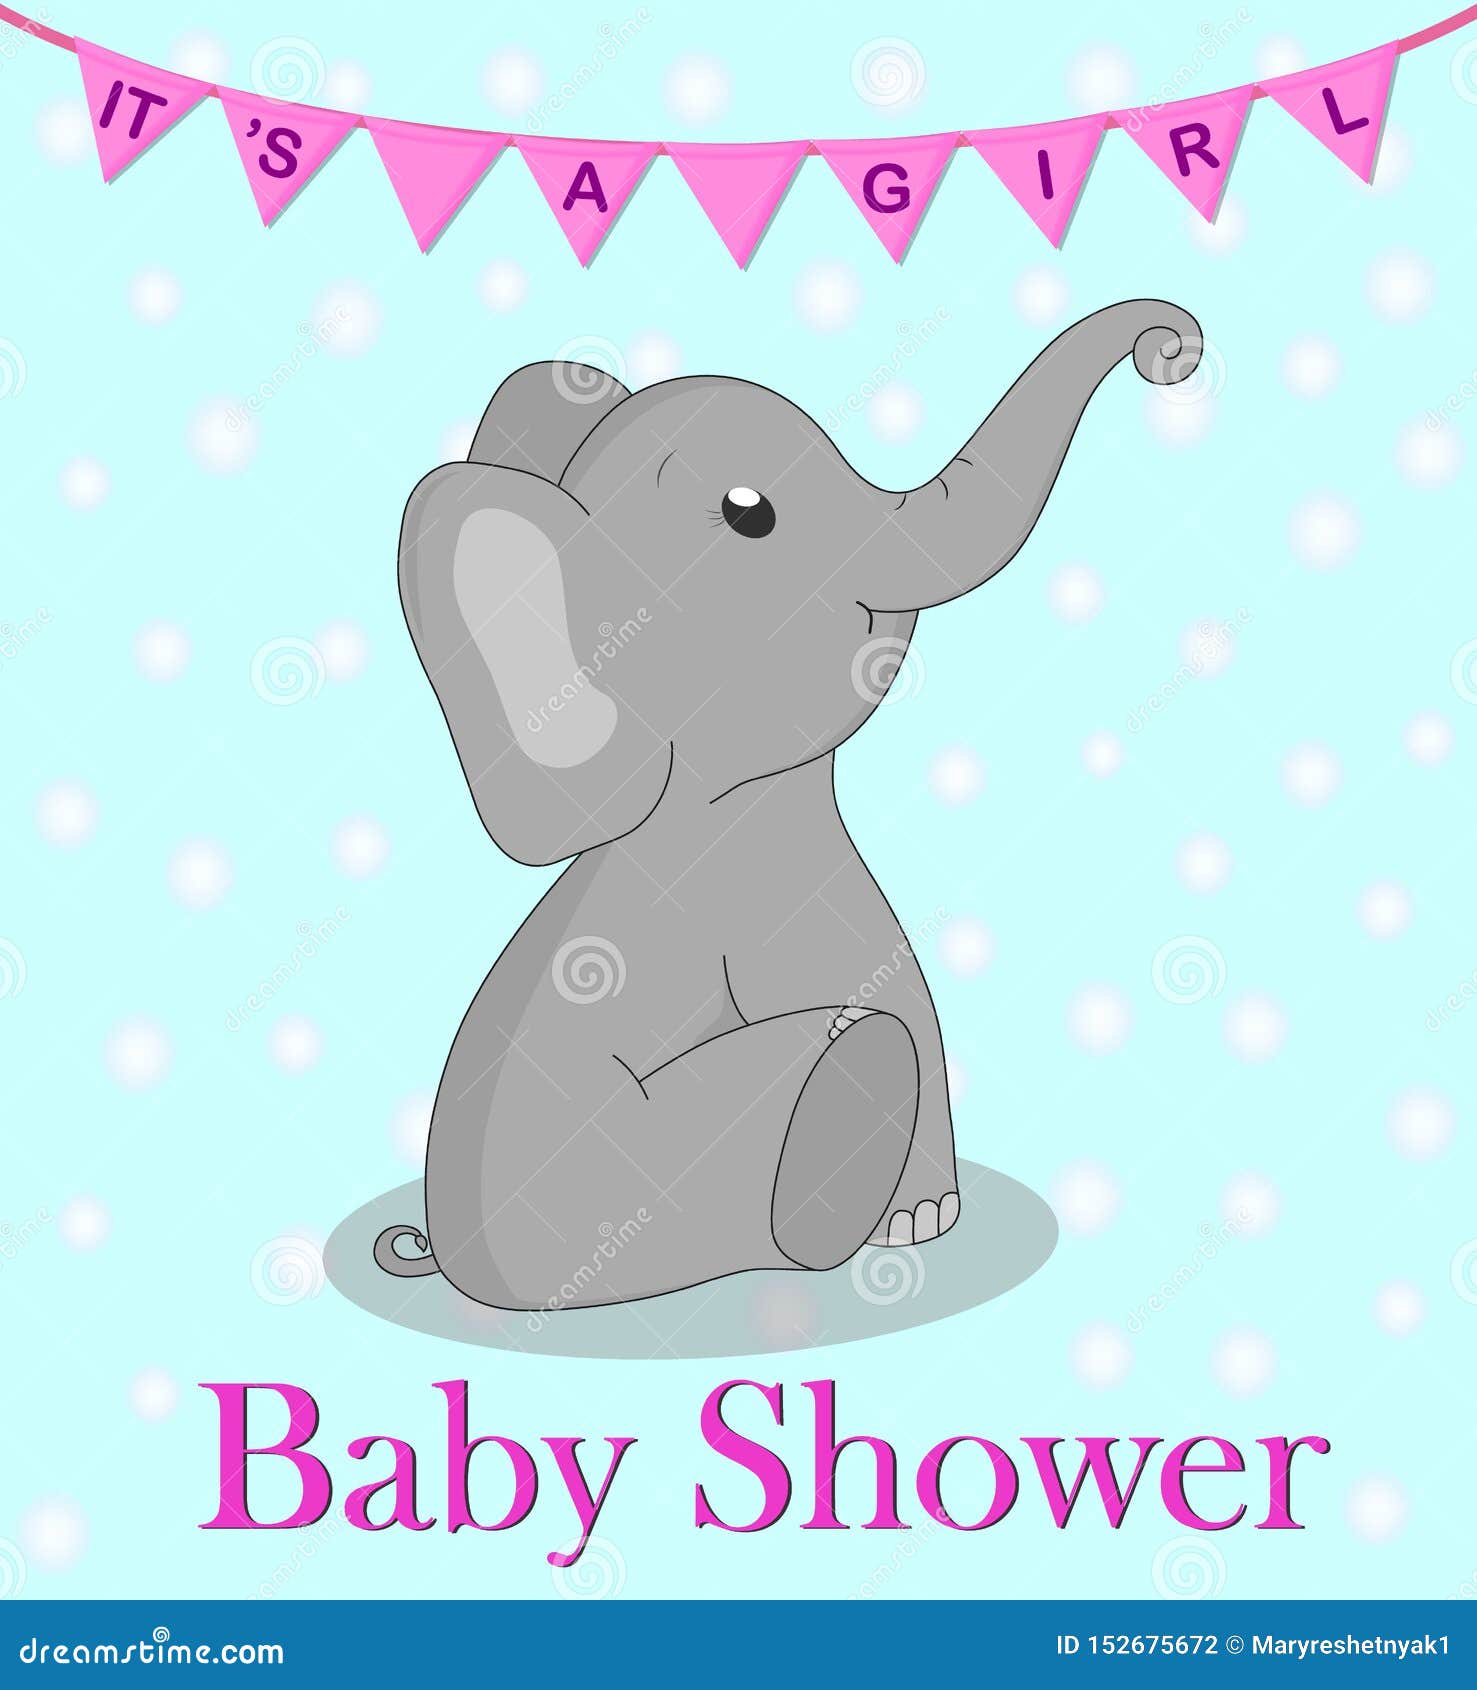 Invitation Card Baby Shower with Elephant for Girl. Cute Elephant with  Flags on Turquoise Background Stock Vector - Illustration of cute, enimal:  152675672